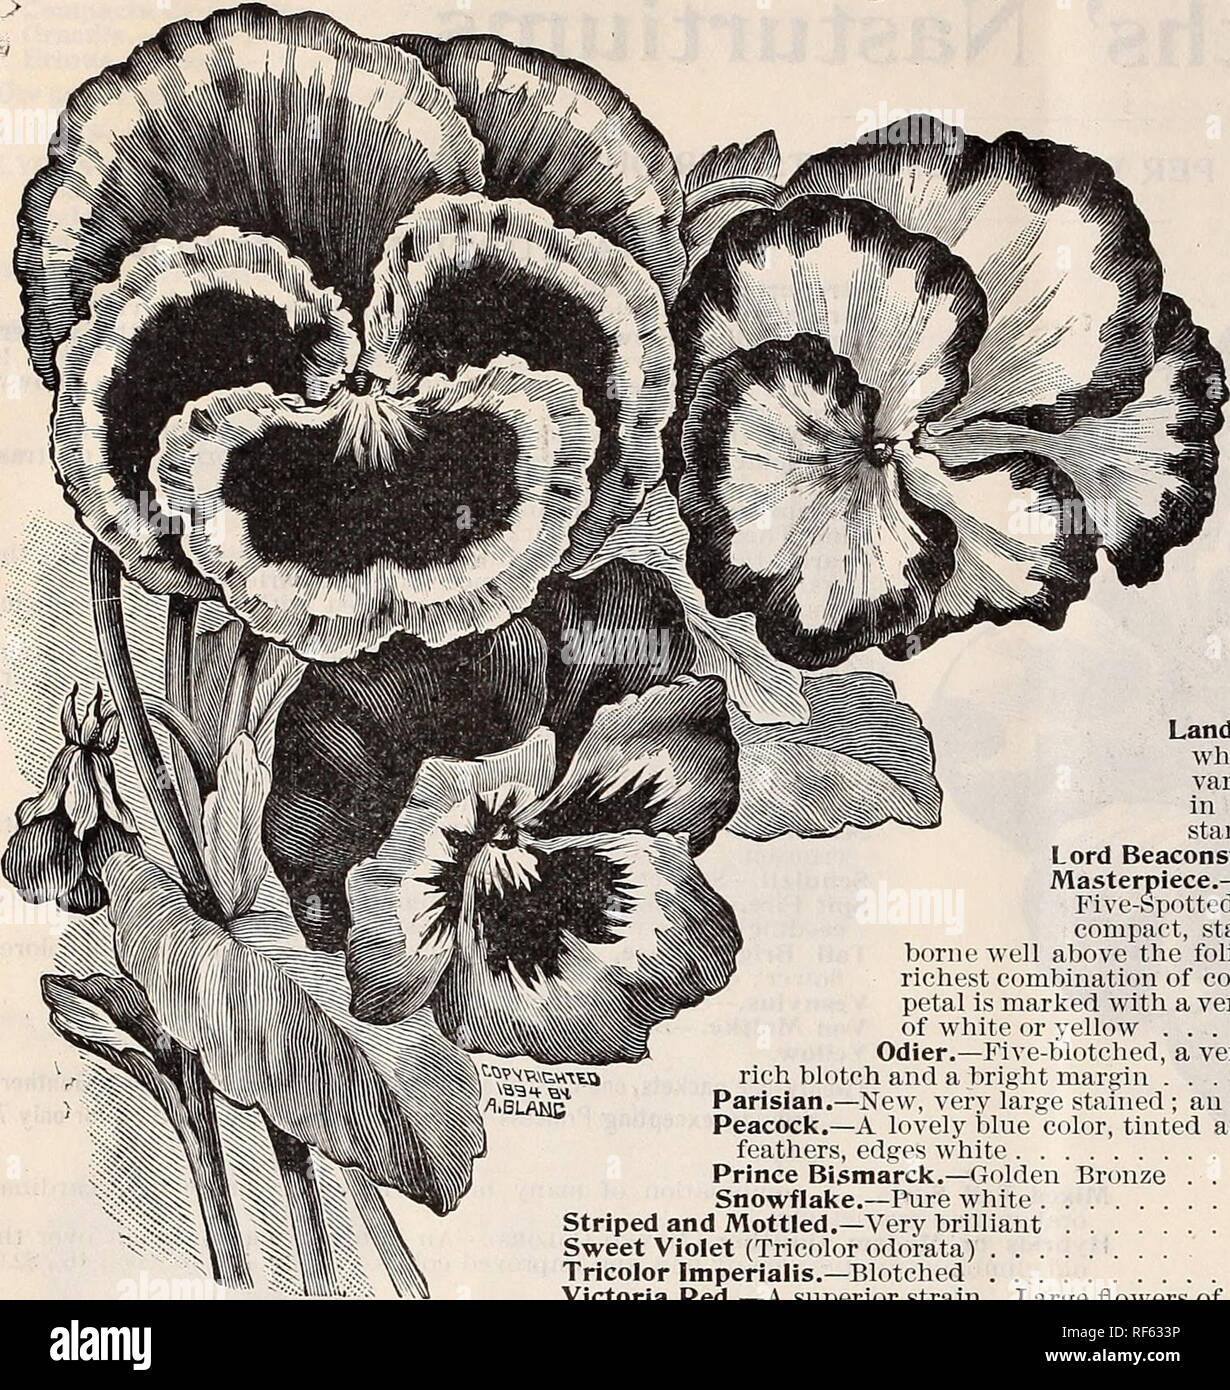 . Landreths' seed catalogue. Nursery stock Pennsylvania Philadelphia Catalogs; Vegetables Seeds Catalogs; Plants, Ornamental Catalogs; Flowers Seeds Catalogs; Fruit Catalogs. Pansies. Viola tricolor, popularly known by the names of Pansy and Johnny-Jump-up, is a half-hardy perennial, a favorite with all. Flowers of every conceivable combination of beautiful colors and also separate and distinctly marked. Sow out of doors in the Fall, under glass during Winter or very early in the Spring. Alba.—White 10 Aurea.—Large yellow 5 Bugnot.—Noted for their very large flowers and beautiful coloring. The Stock Photo